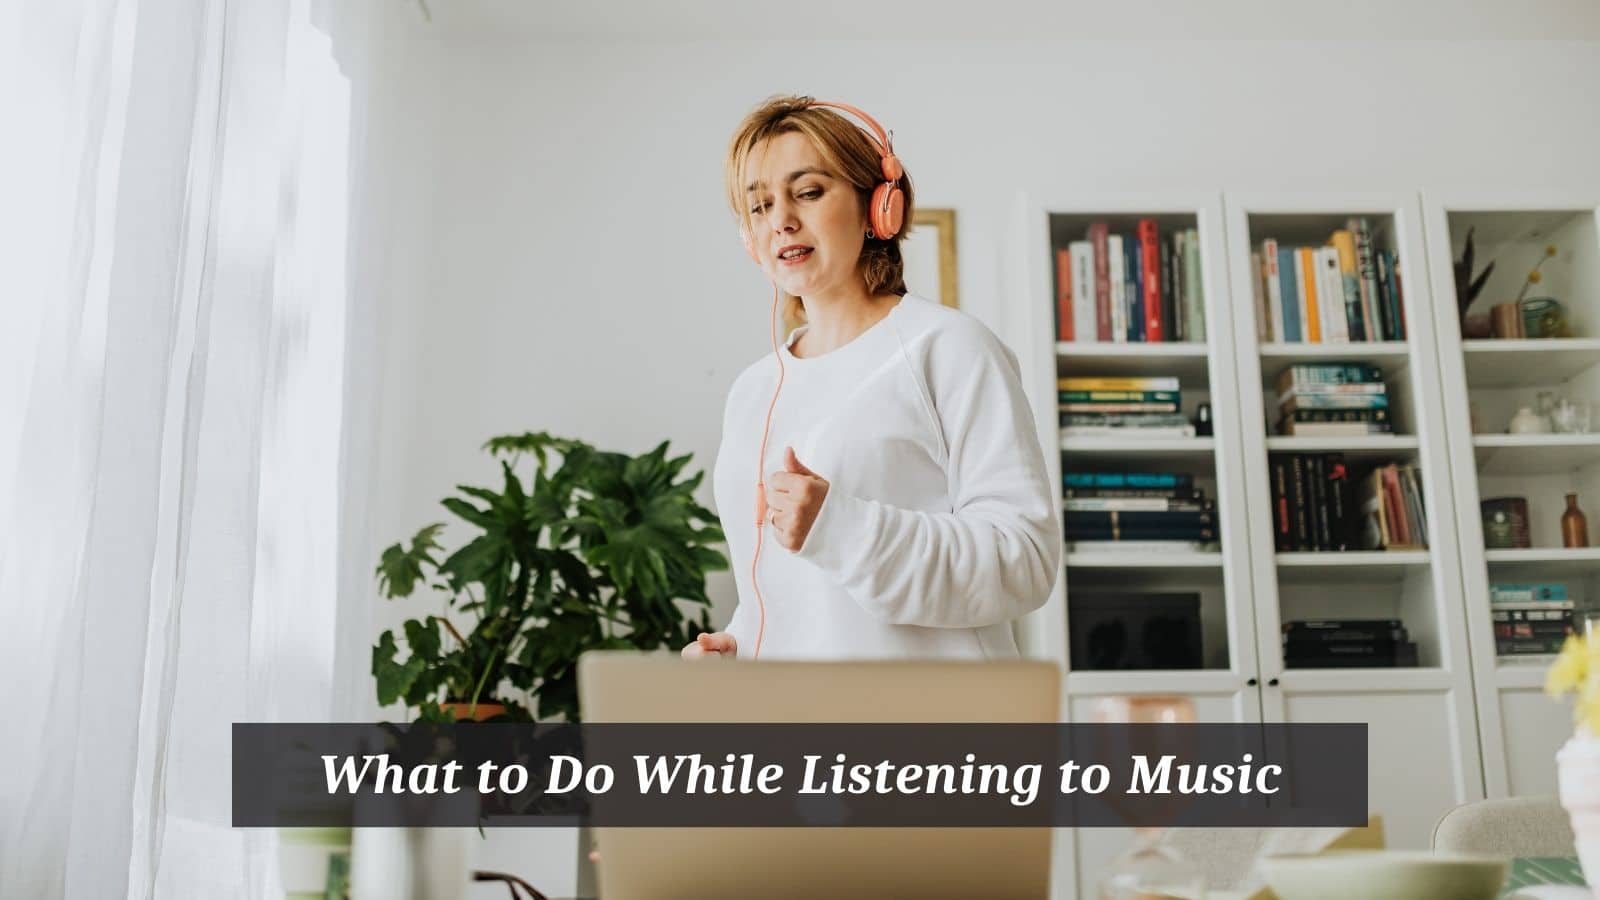 What to Do While Listening to Music